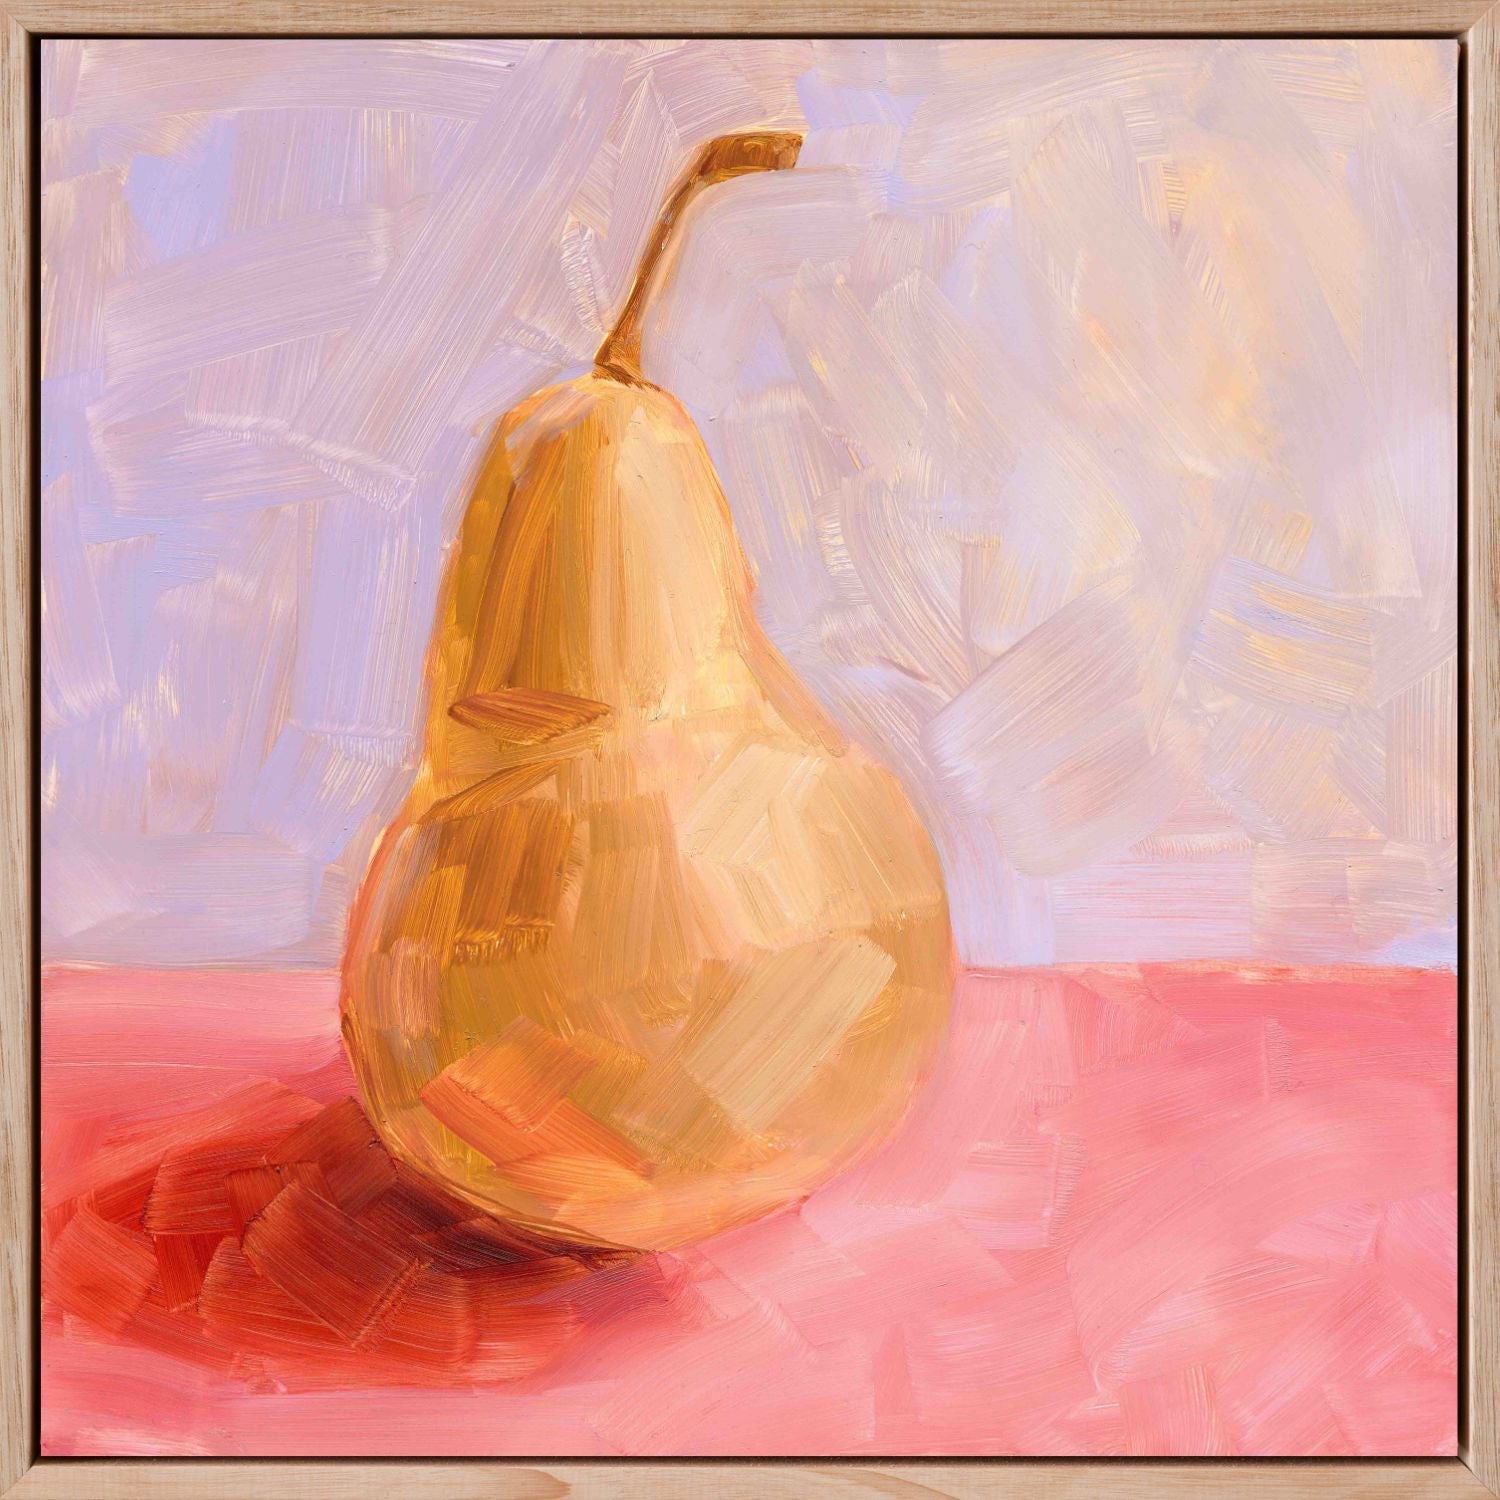 fine art framed canvas print of a yellow pear with strong red-pink shadows on a textured pink surface and a textured lilac background